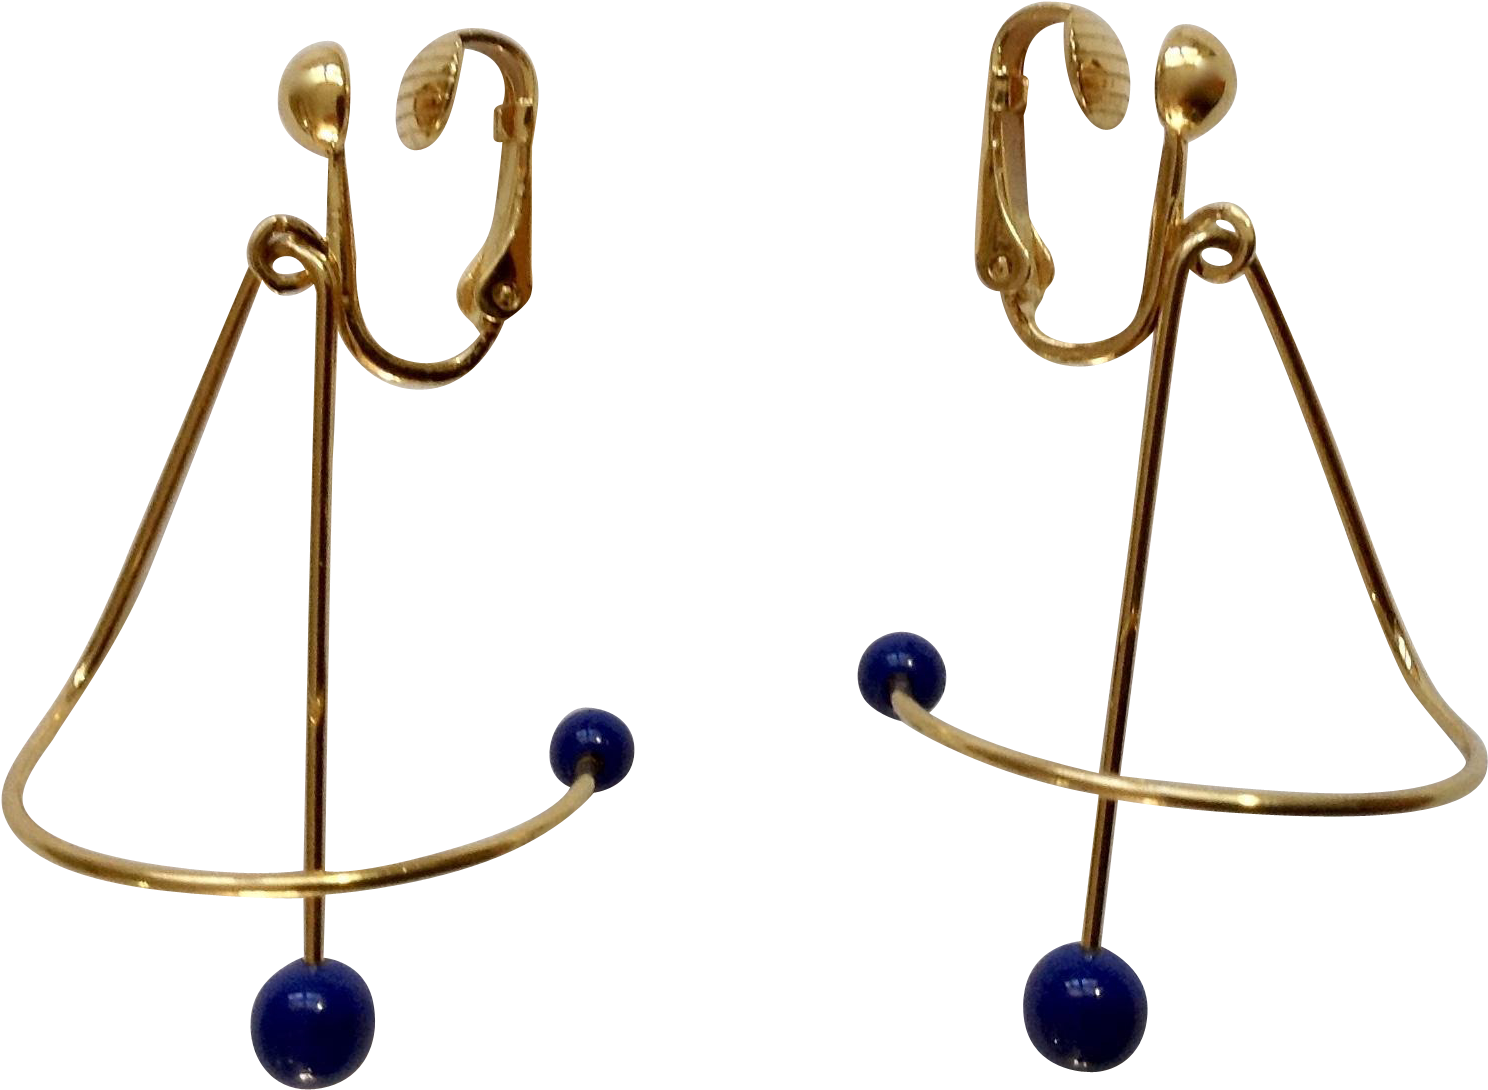 Gold Tone Wire With Blue Beads Modern Art Clip On Earrings - Wood (1487x1487)